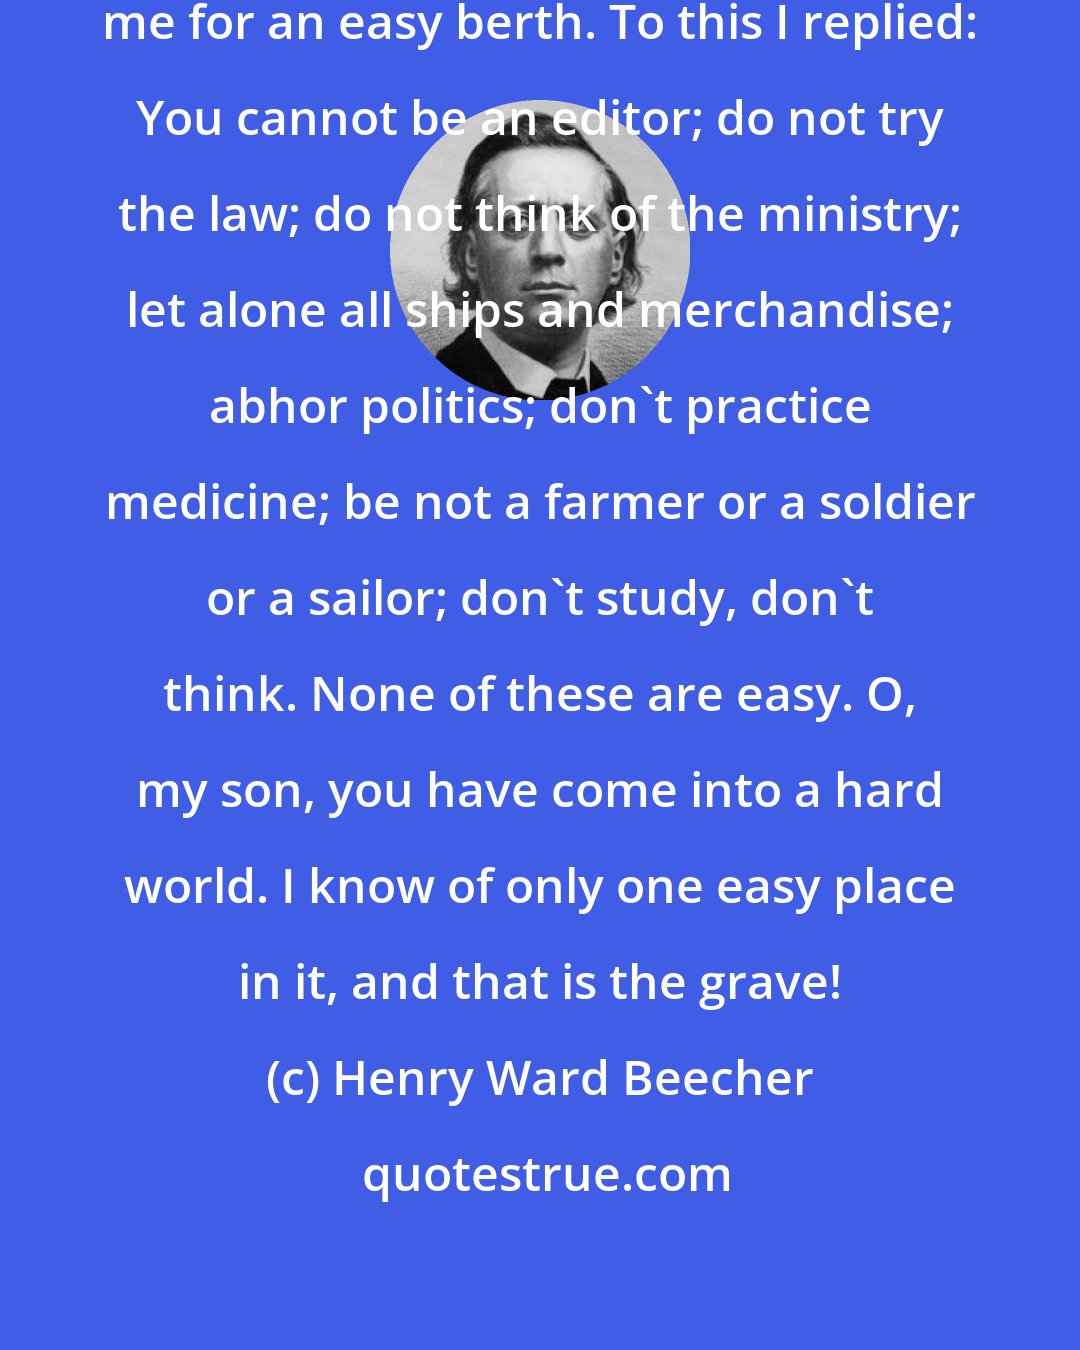 Henry Ward Beecher: I received a letter from a lad asking me for an easy berth. To this I replied: You cannot be an editor; do not try the law; do not think of the ministry; let alone all ships and merchandise; abhor politics; don't practice medicine; be not a farmer or a soldier or a sailor; don't study, don't think. None of these are easy. O, my son, you have come into a hard world. I know of only one easy place in it, and that is the grave!